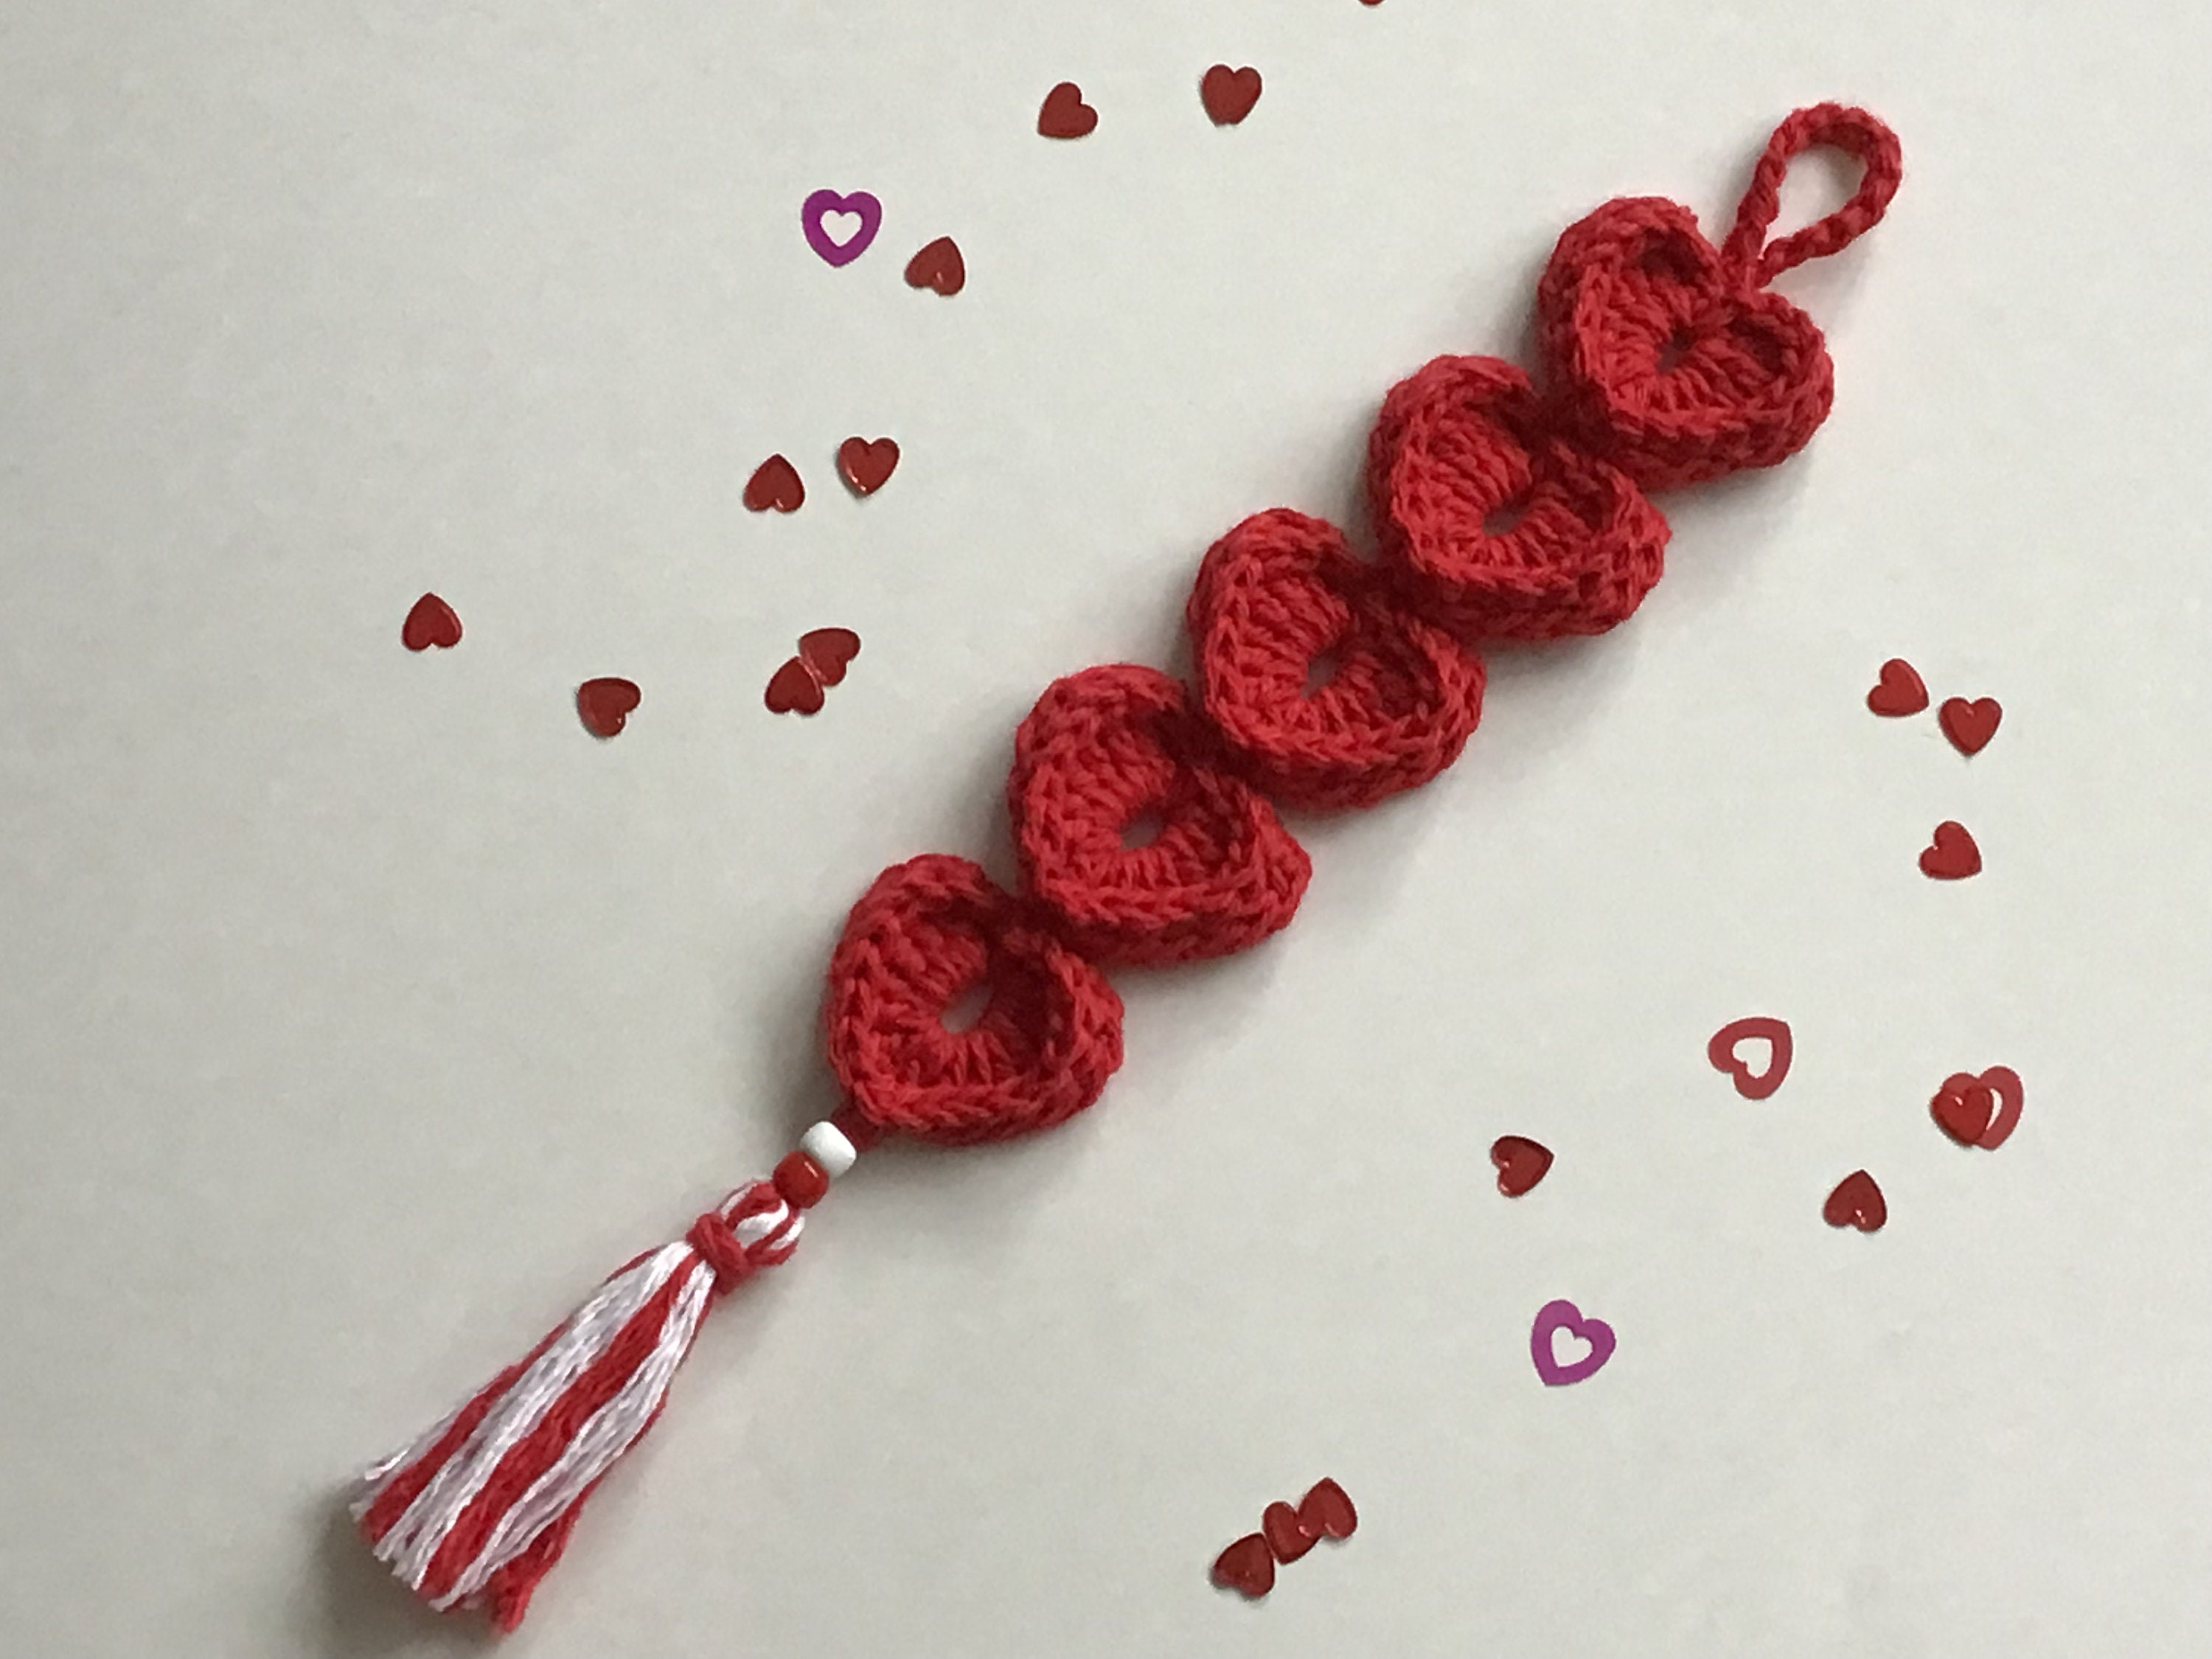 How to make a Beautiful Crochet Heart Bracelet for Valentines Day - YouTube